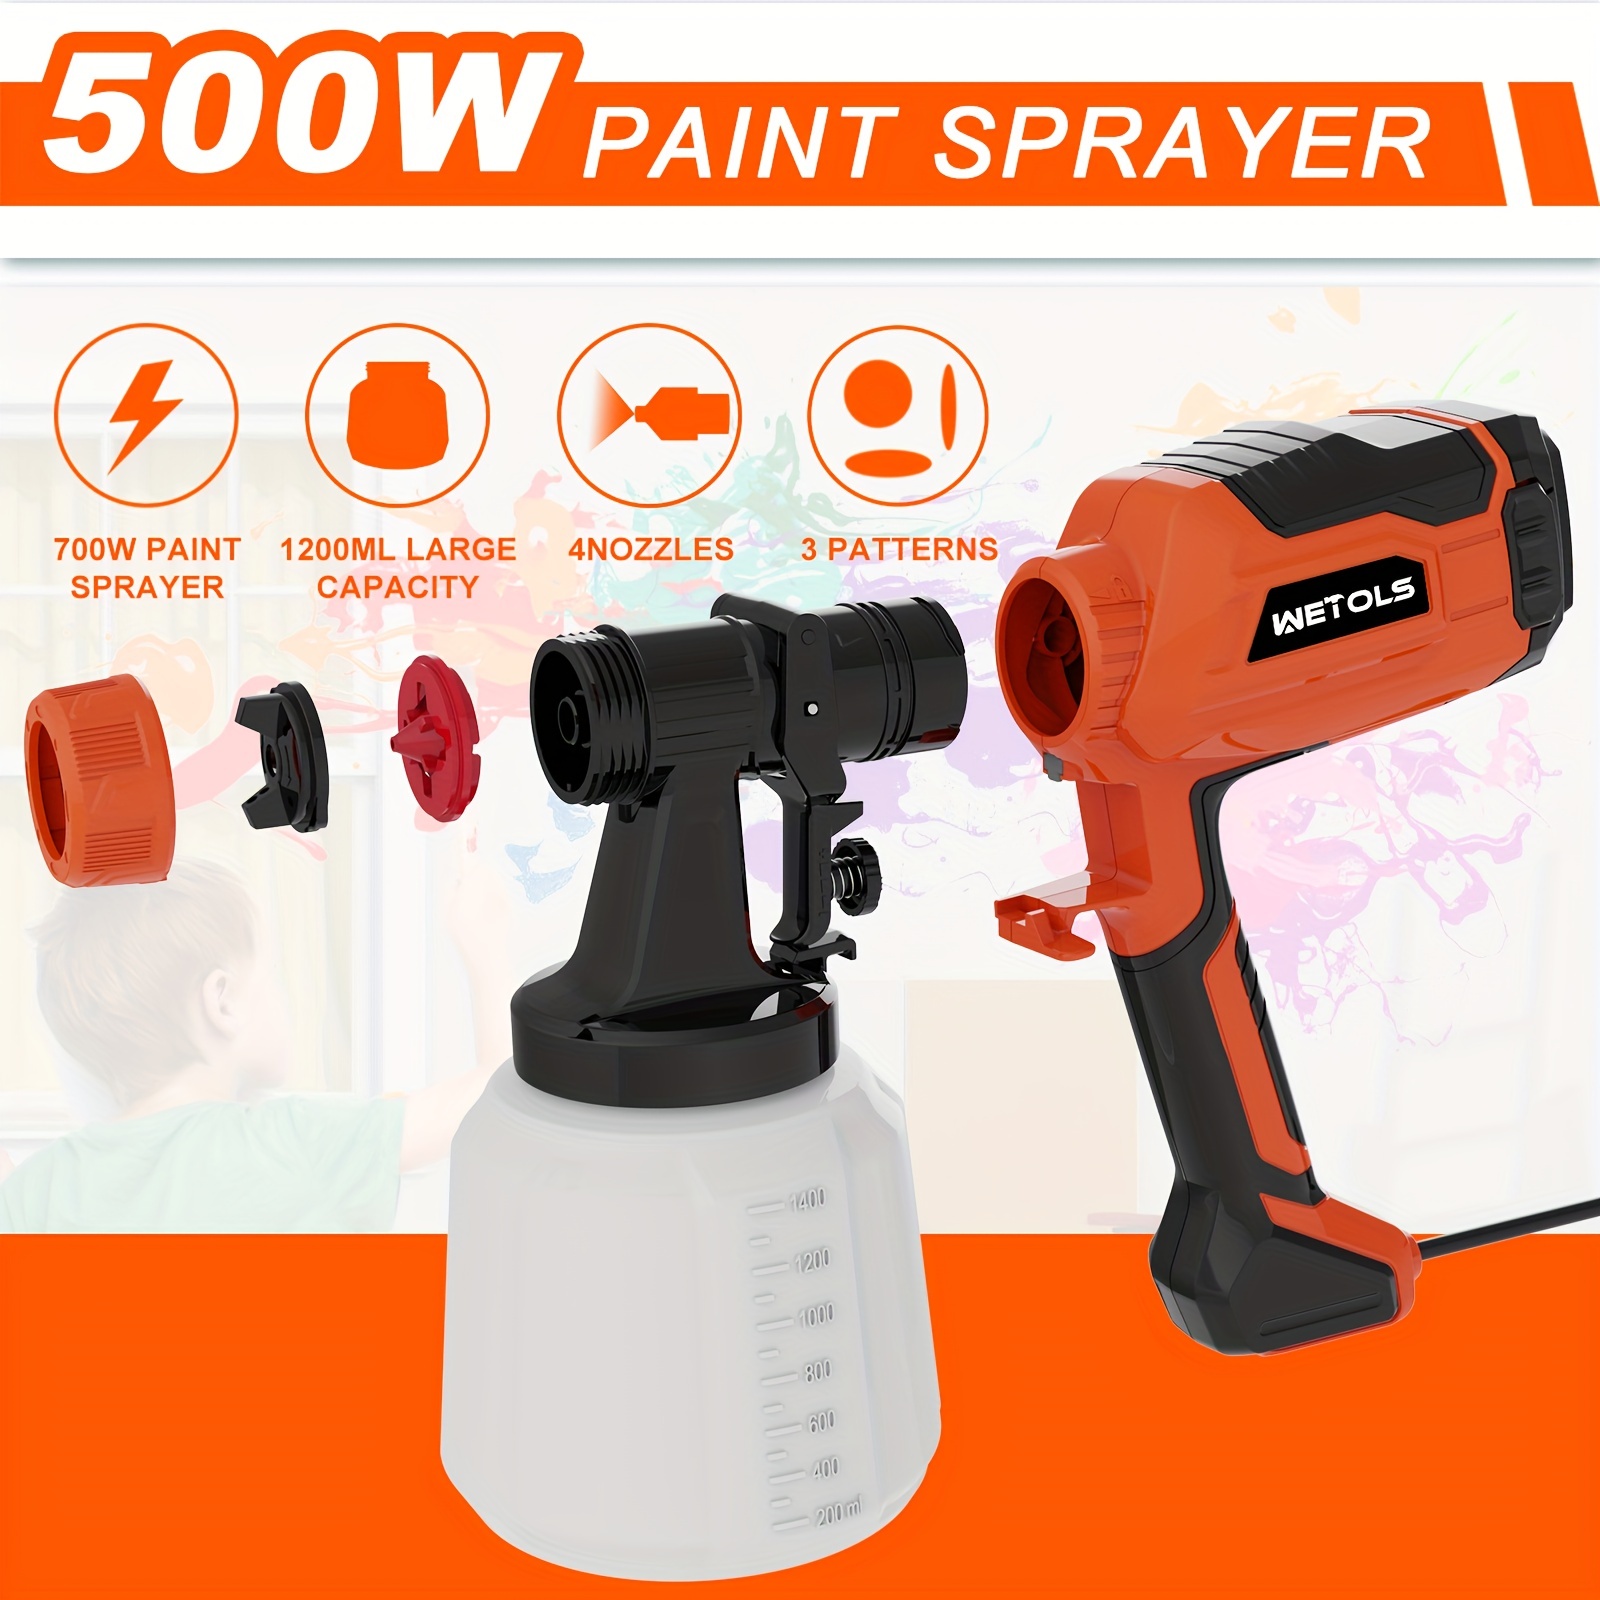 Tilswall 800W HVLP Paint Sprayer Electric Spray Gun review – look out  brushes, your days are numbered - The Gadgeteer